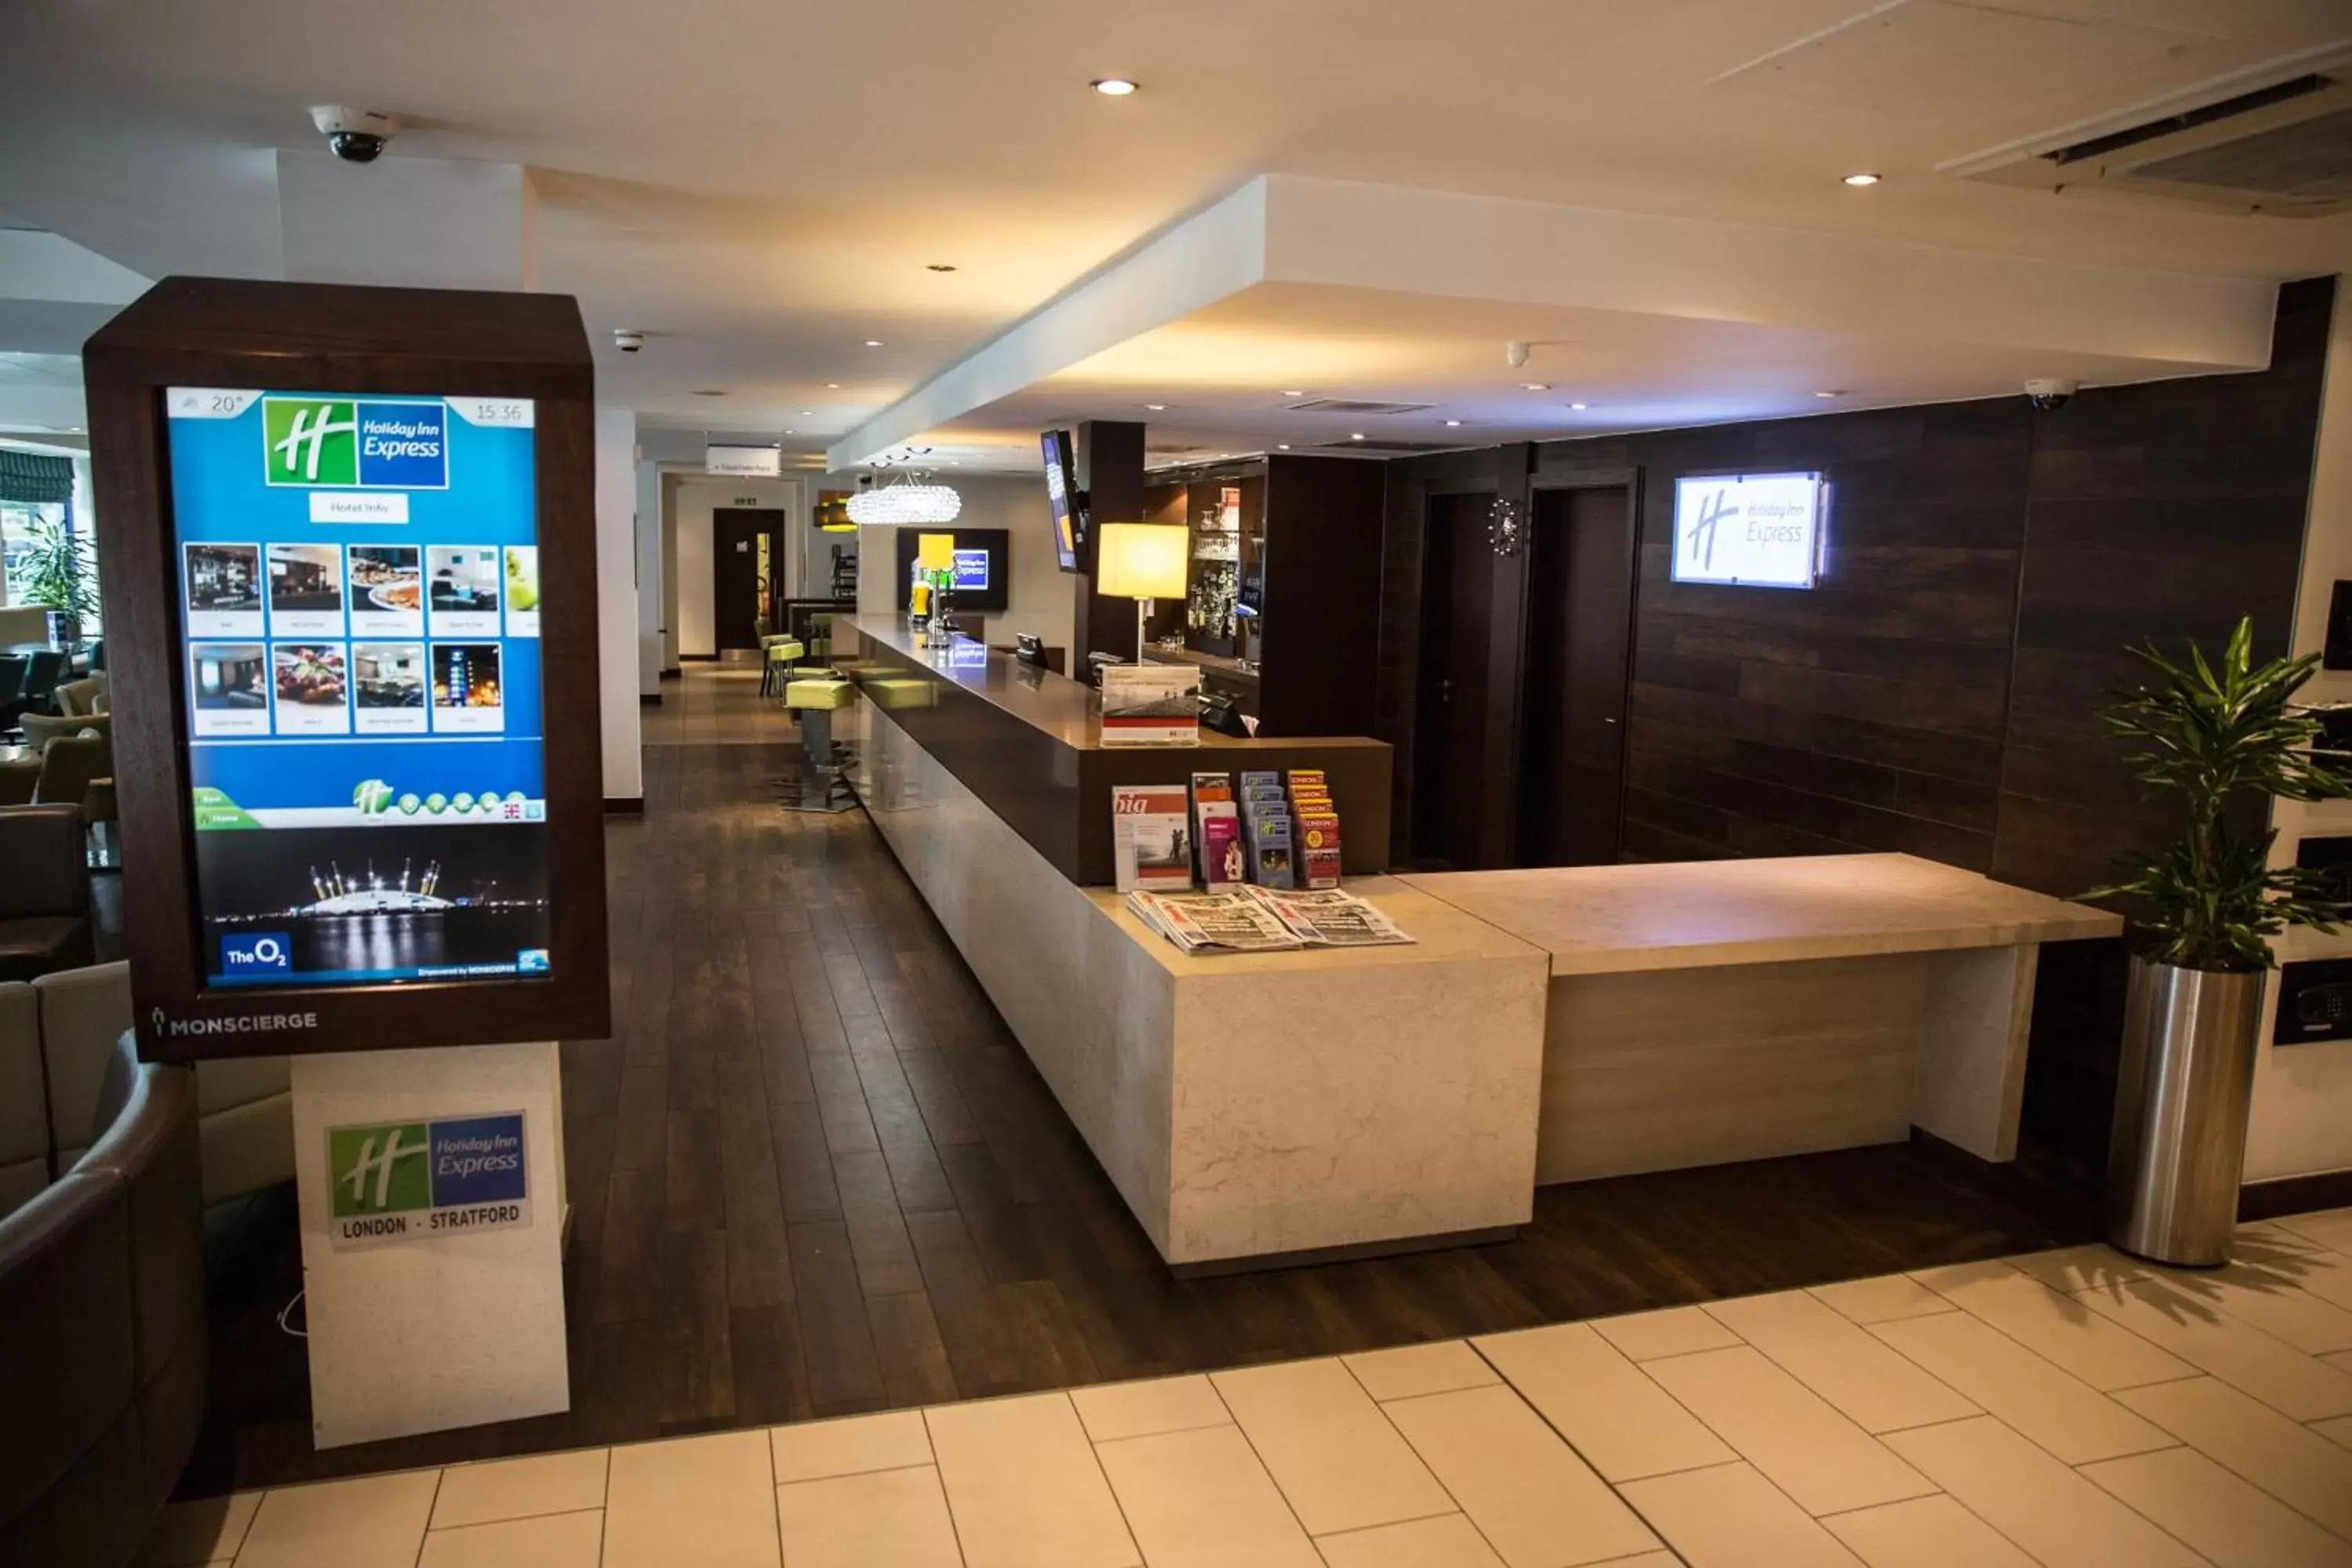 Property building in Holiday Inn Express London Stratford, an IHG Hotel